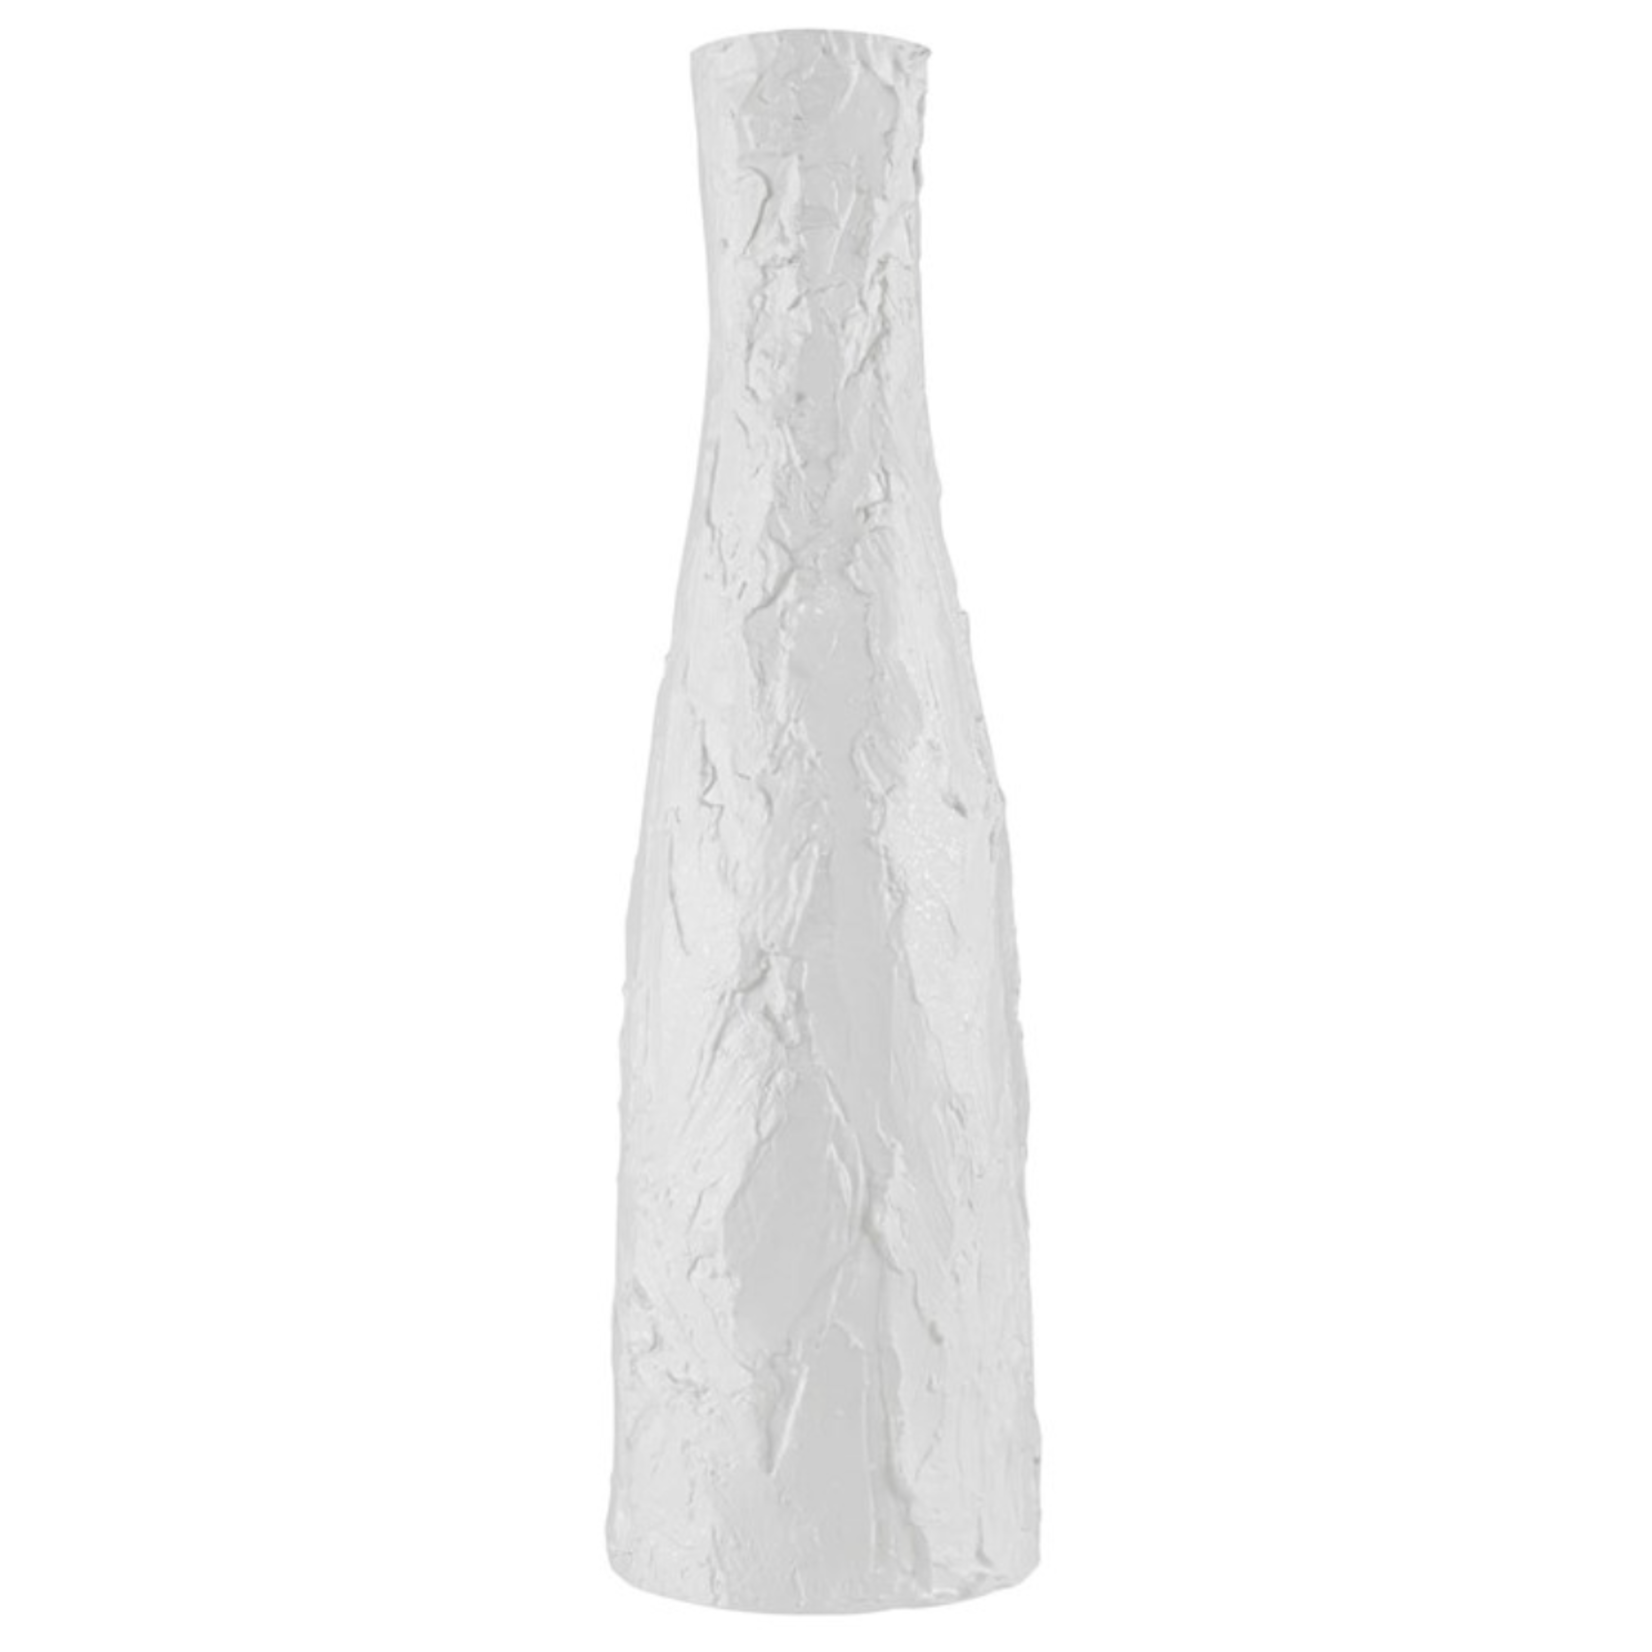 Outside The Box 28" Iceberg White Richly Textured Handcrafted Vase